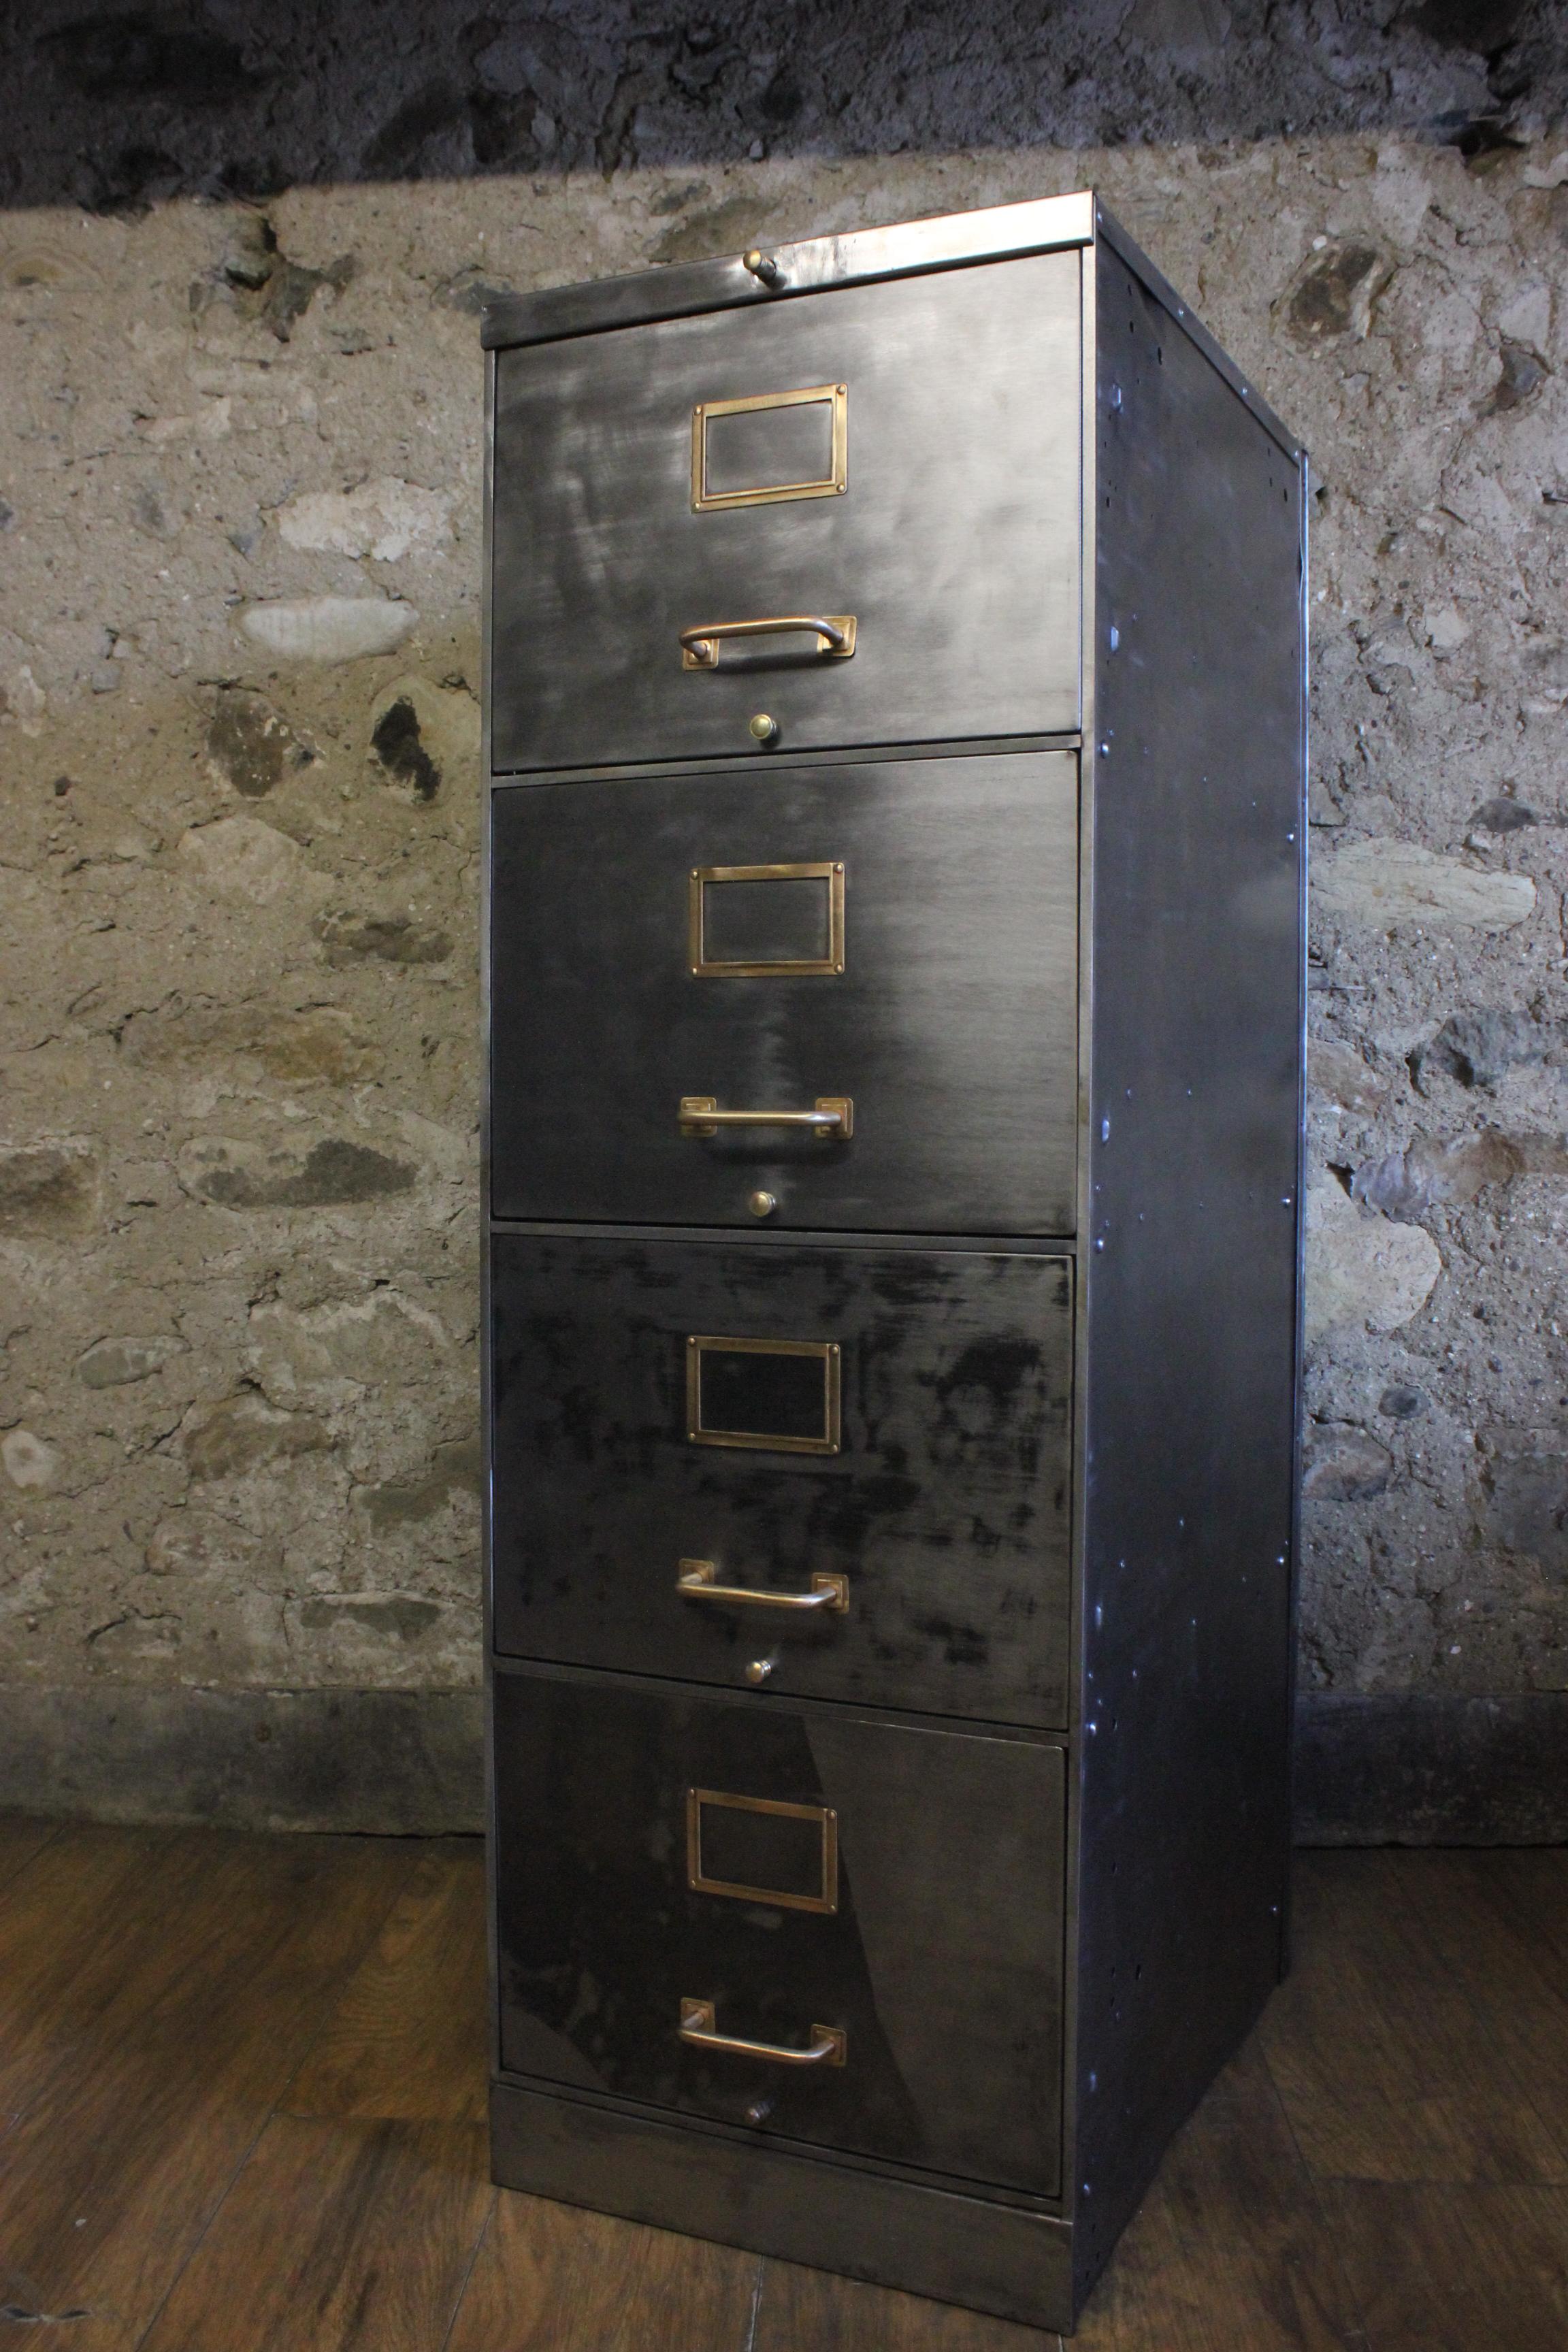 A vintage industrial 1930s American stripped metal 4-drawer filing cabinet. It has solid brass fittings and was manufactured by Art Metal, Jamestown New York. It has been stripped back to bare metal on all sides and is in good solid condition and